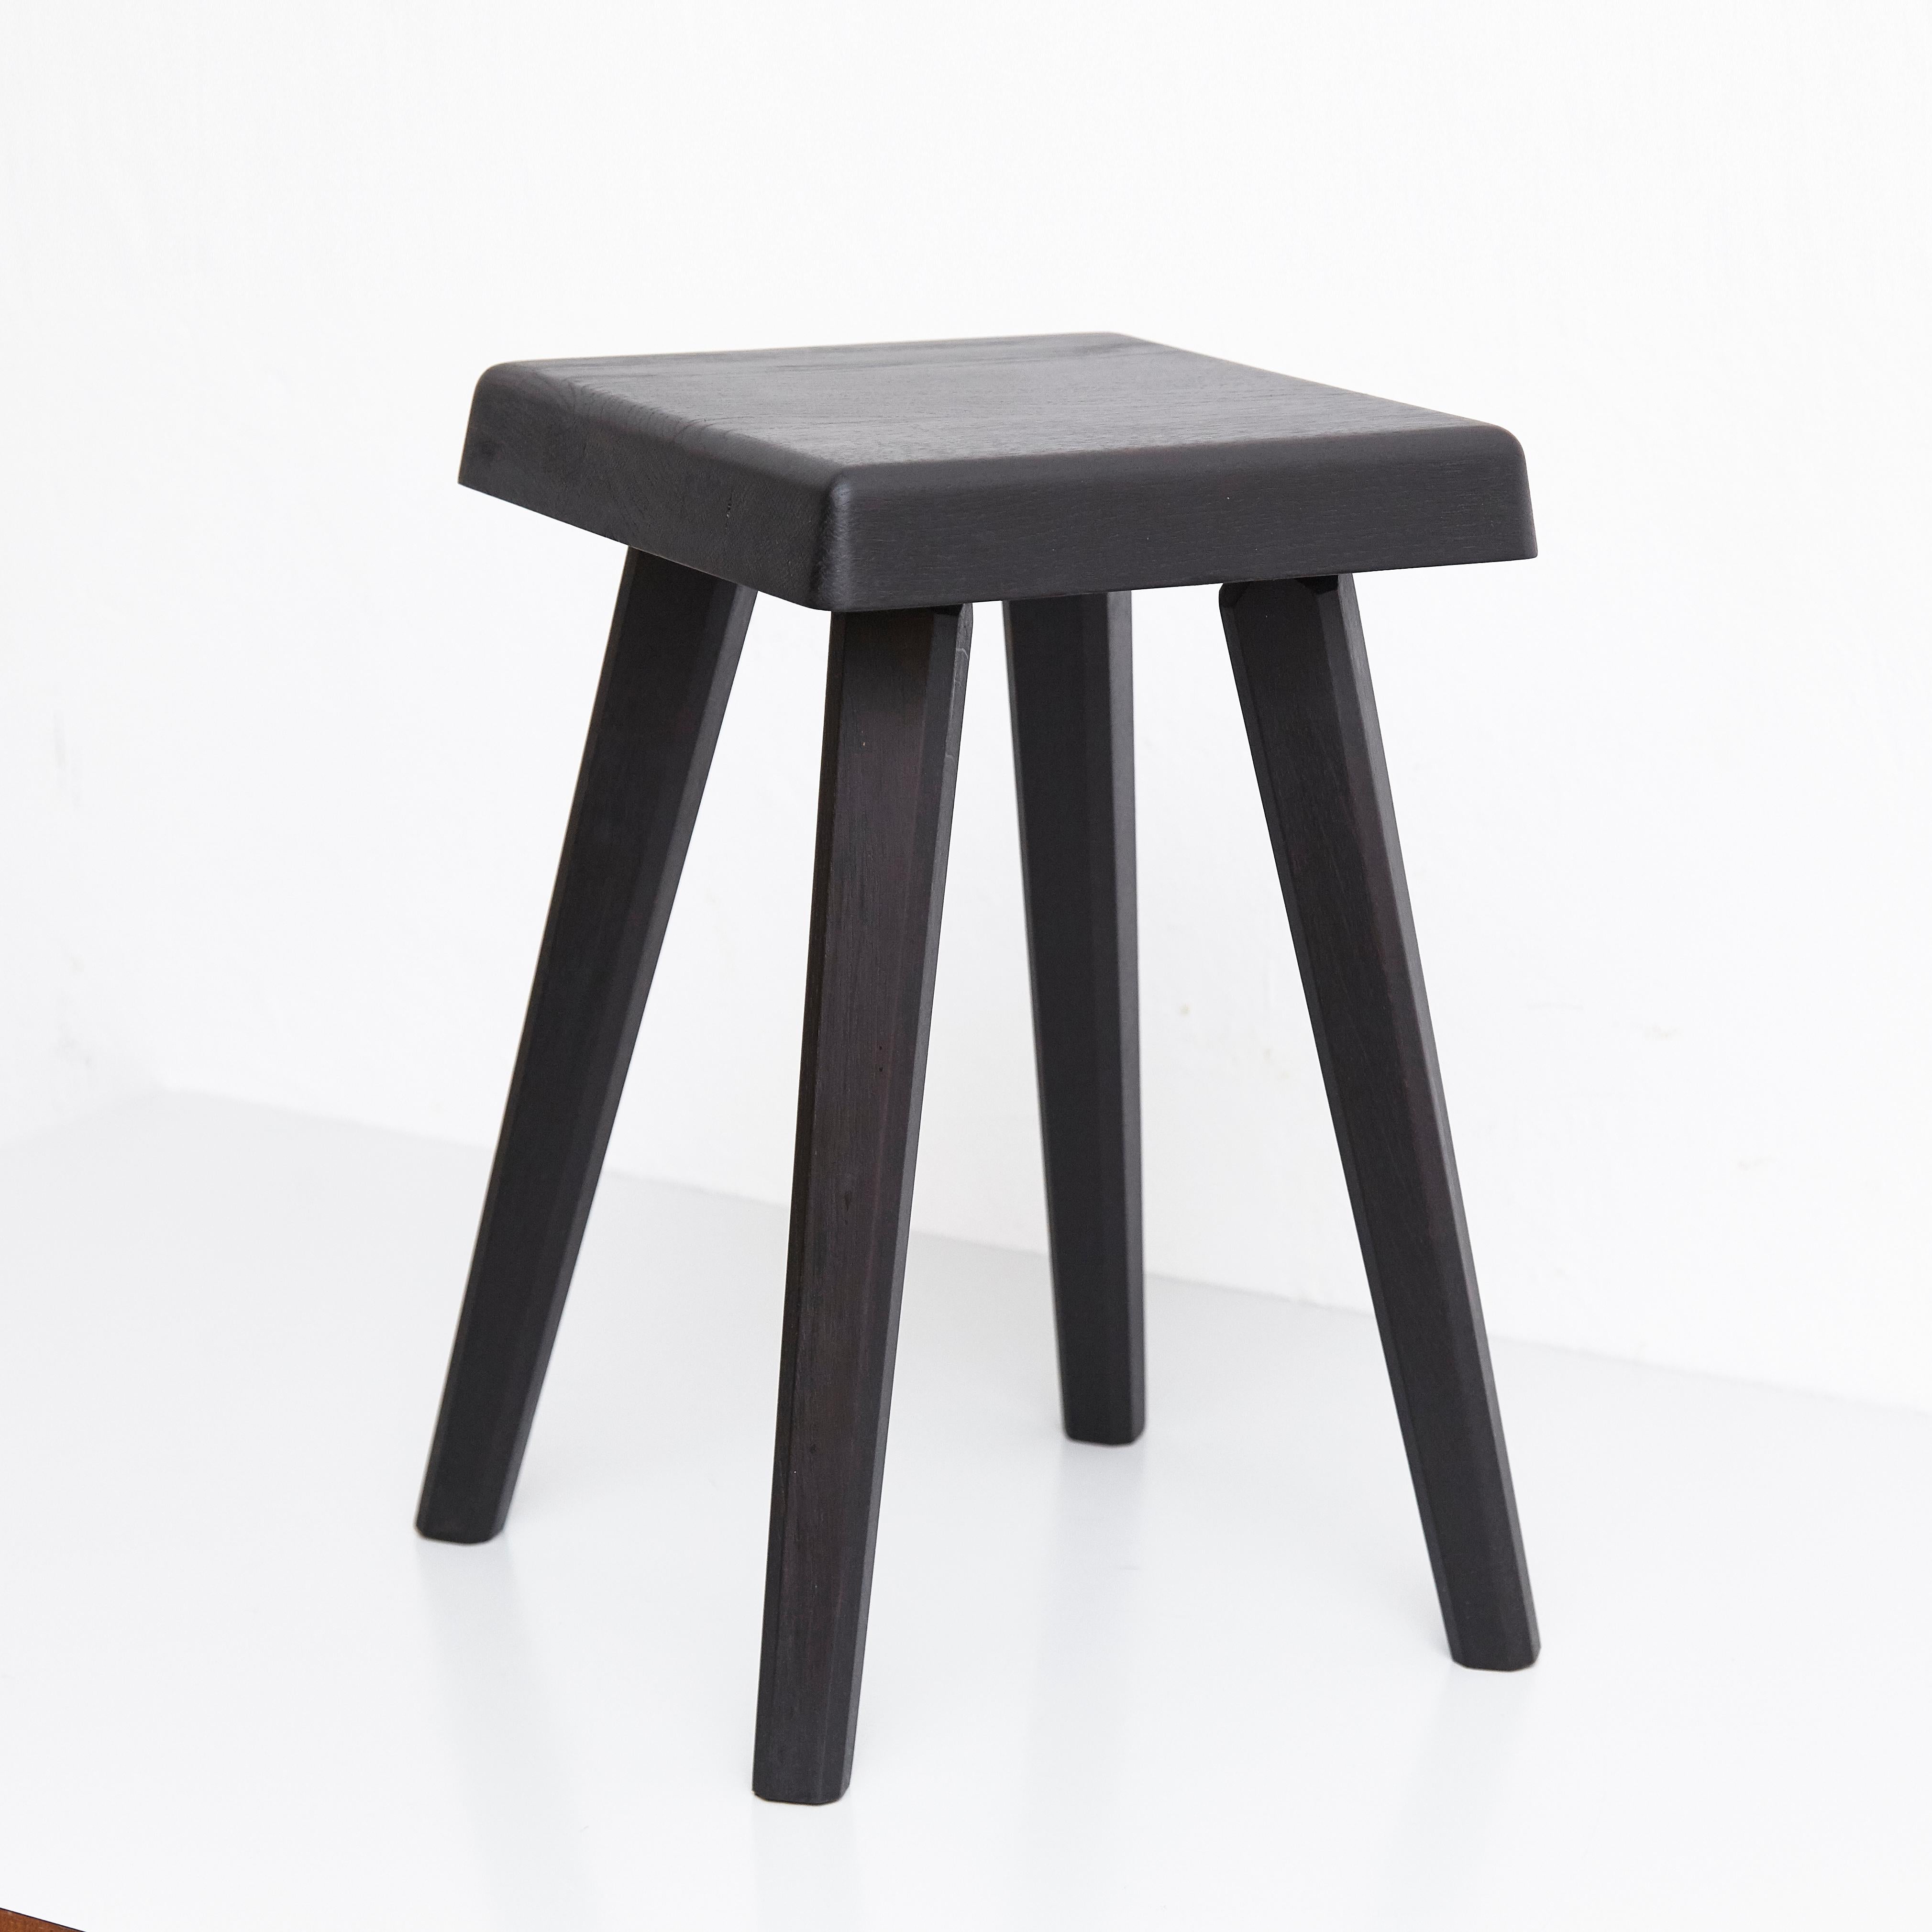 Stool designed by Pierre Chapo, manufactured in France, 1960s.

Manufactured by Chapo Creation, 2019.
Oakwood.

In good original condition, with minor wear consistent with age and use, preserving a beautiful patina.

Pierre Chapo is born in a